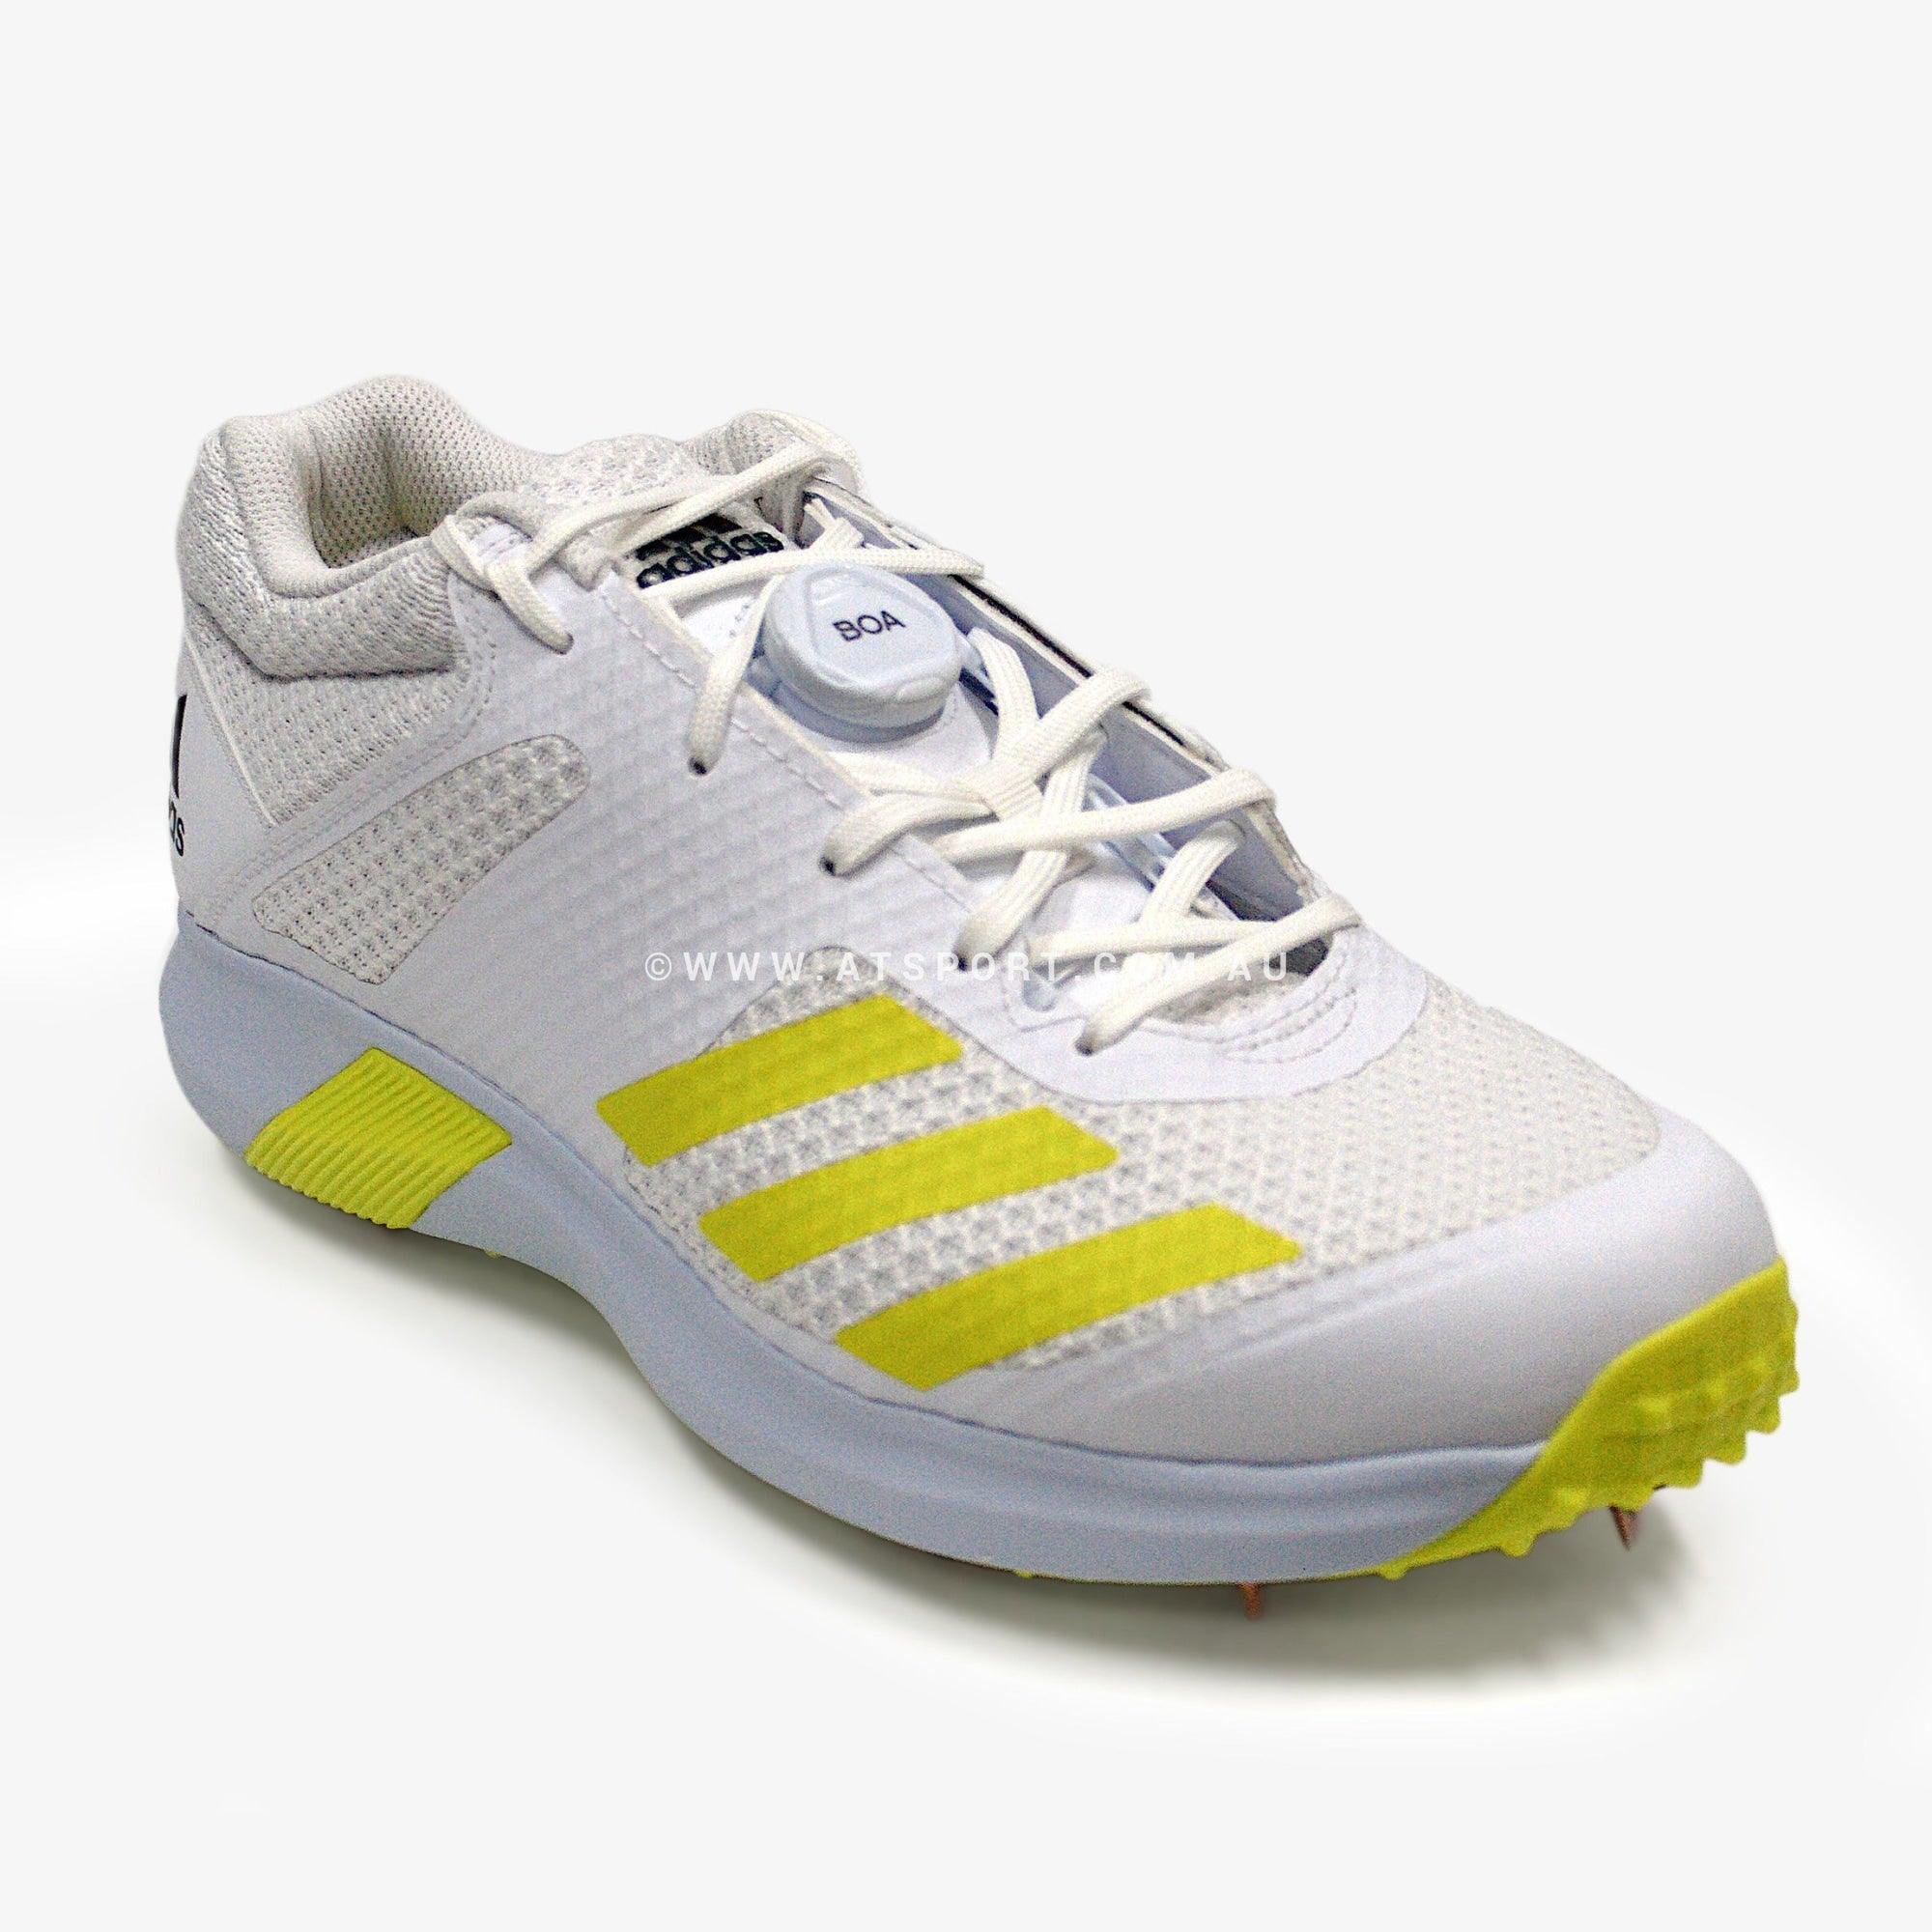 Adidas adipower Vector Mid Spike Cricket Shoes - AT Sports